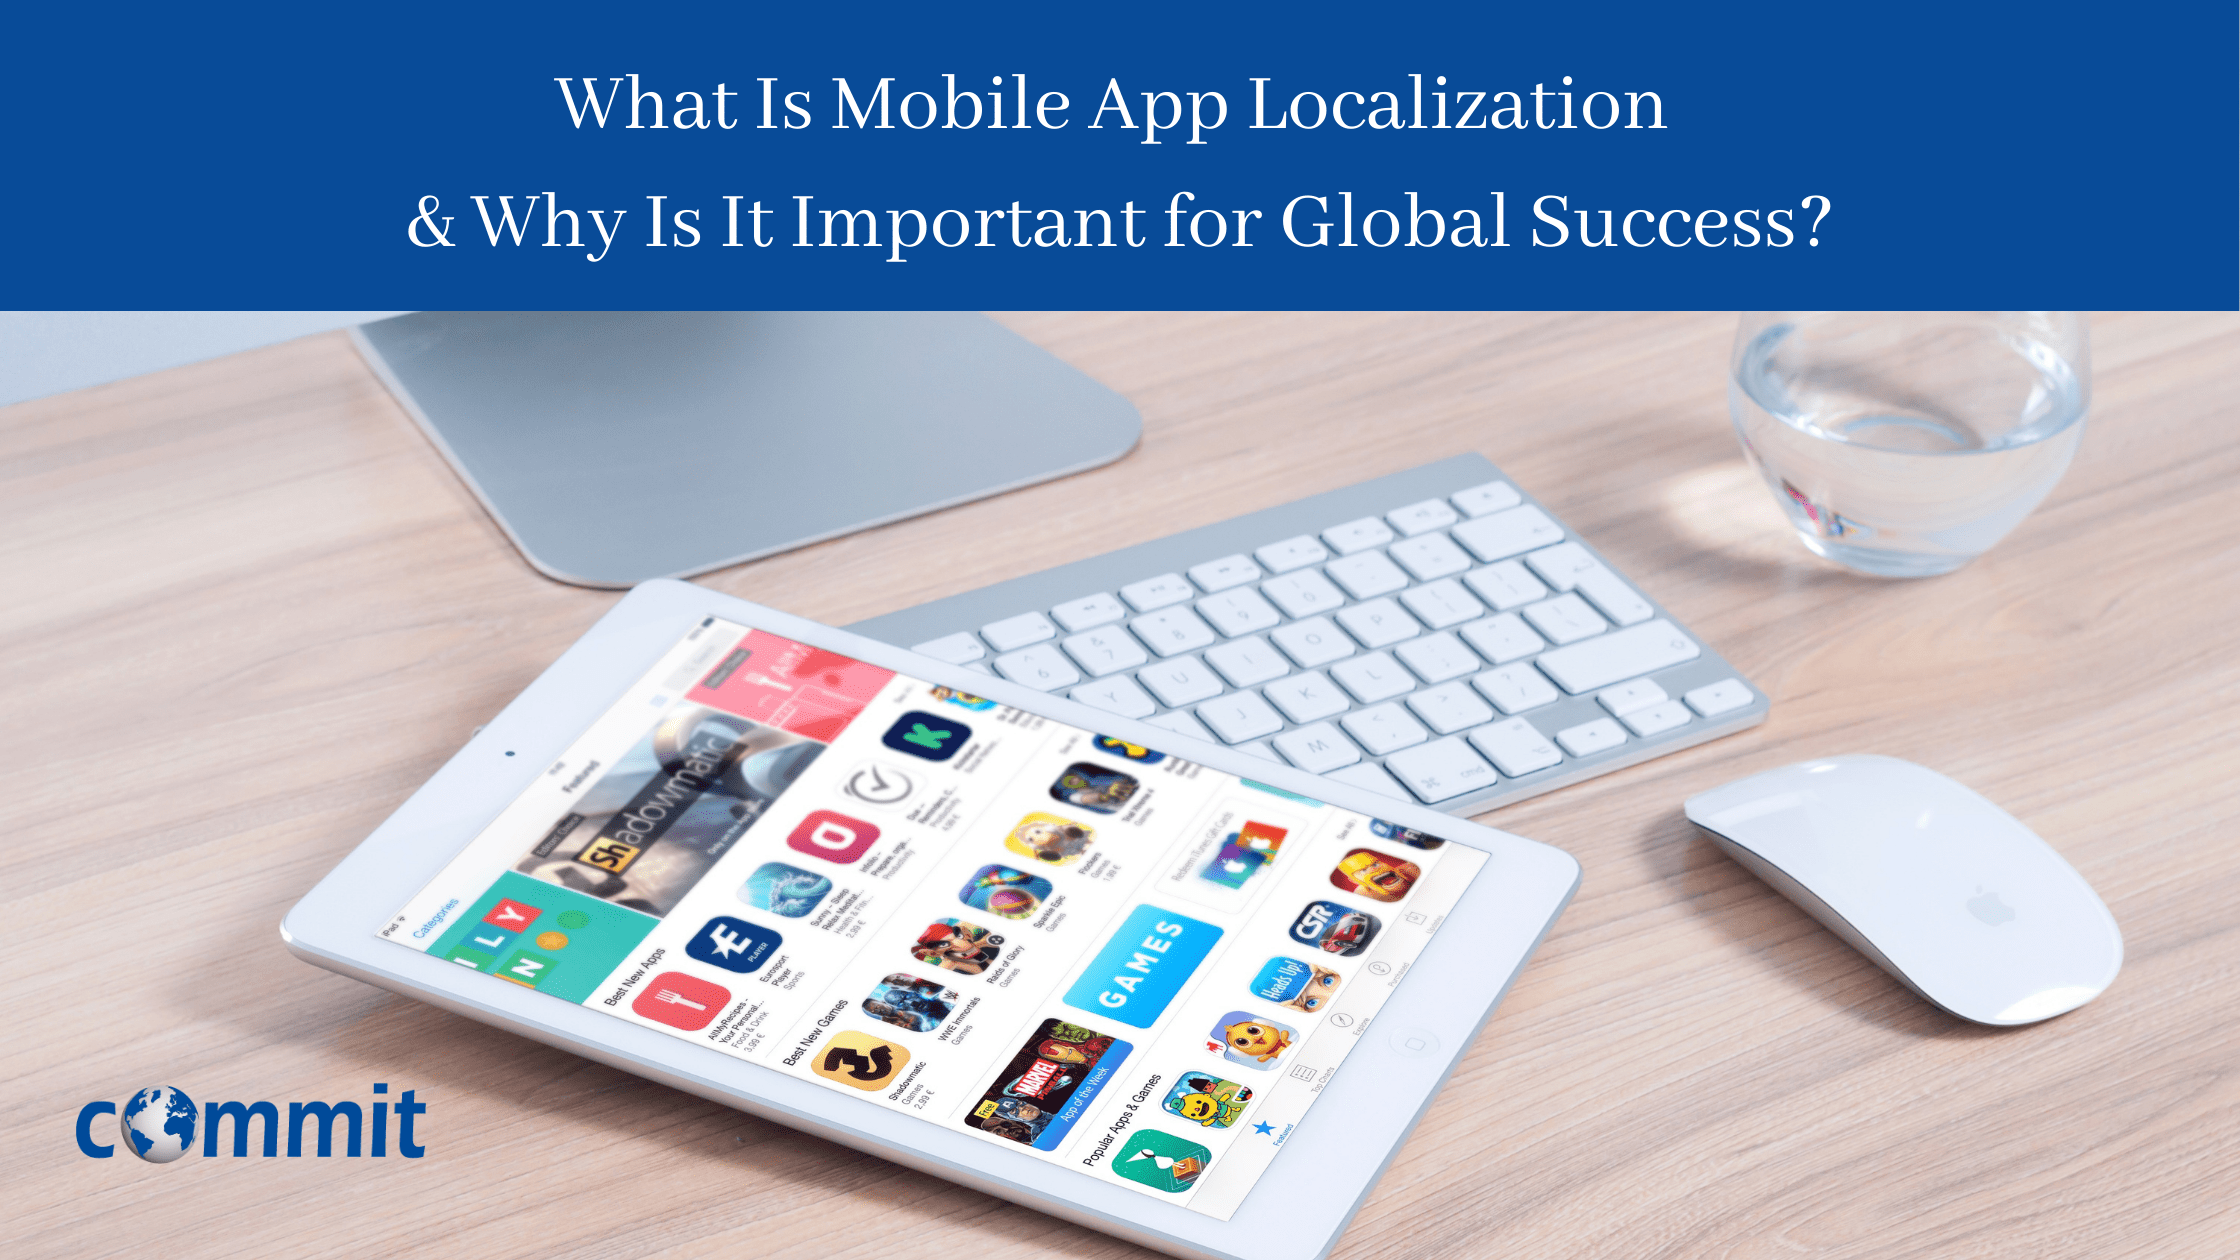 What Is Mobile App Localization & Why Is It Important for Global Success?